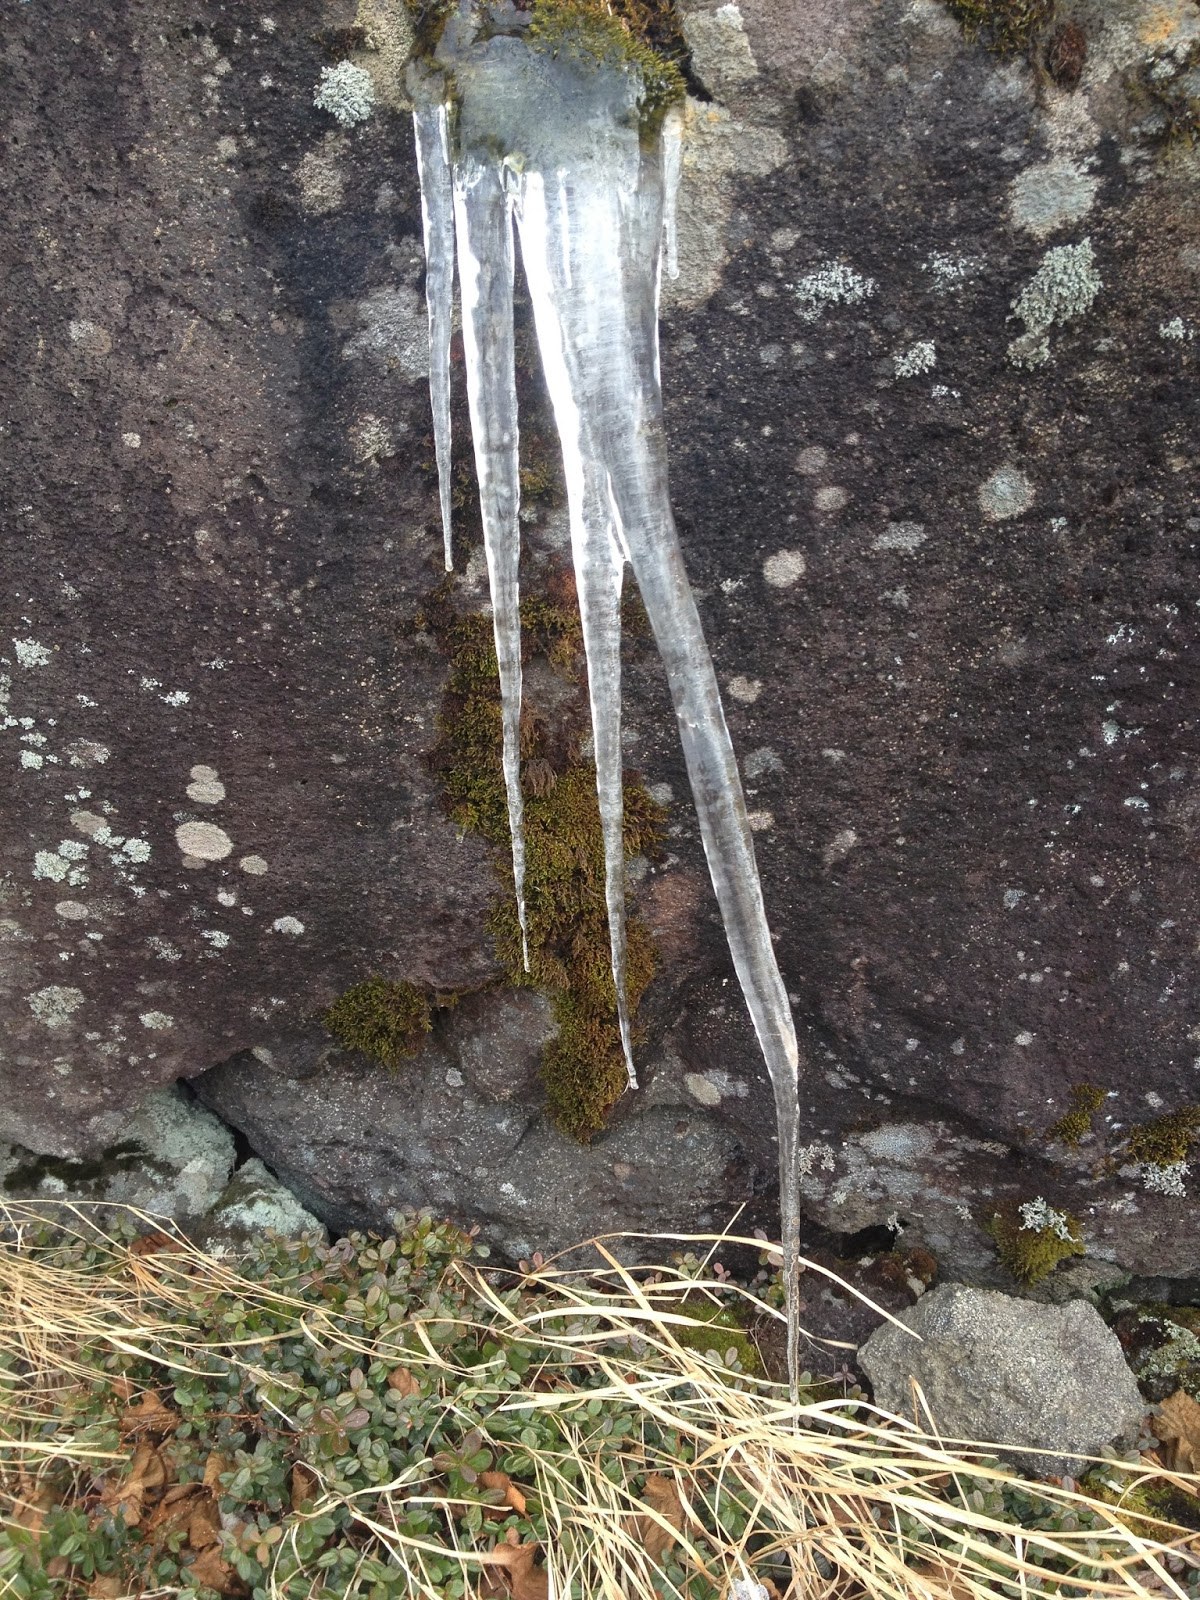 Some icicles growing diagonally from a lichen-covered rock